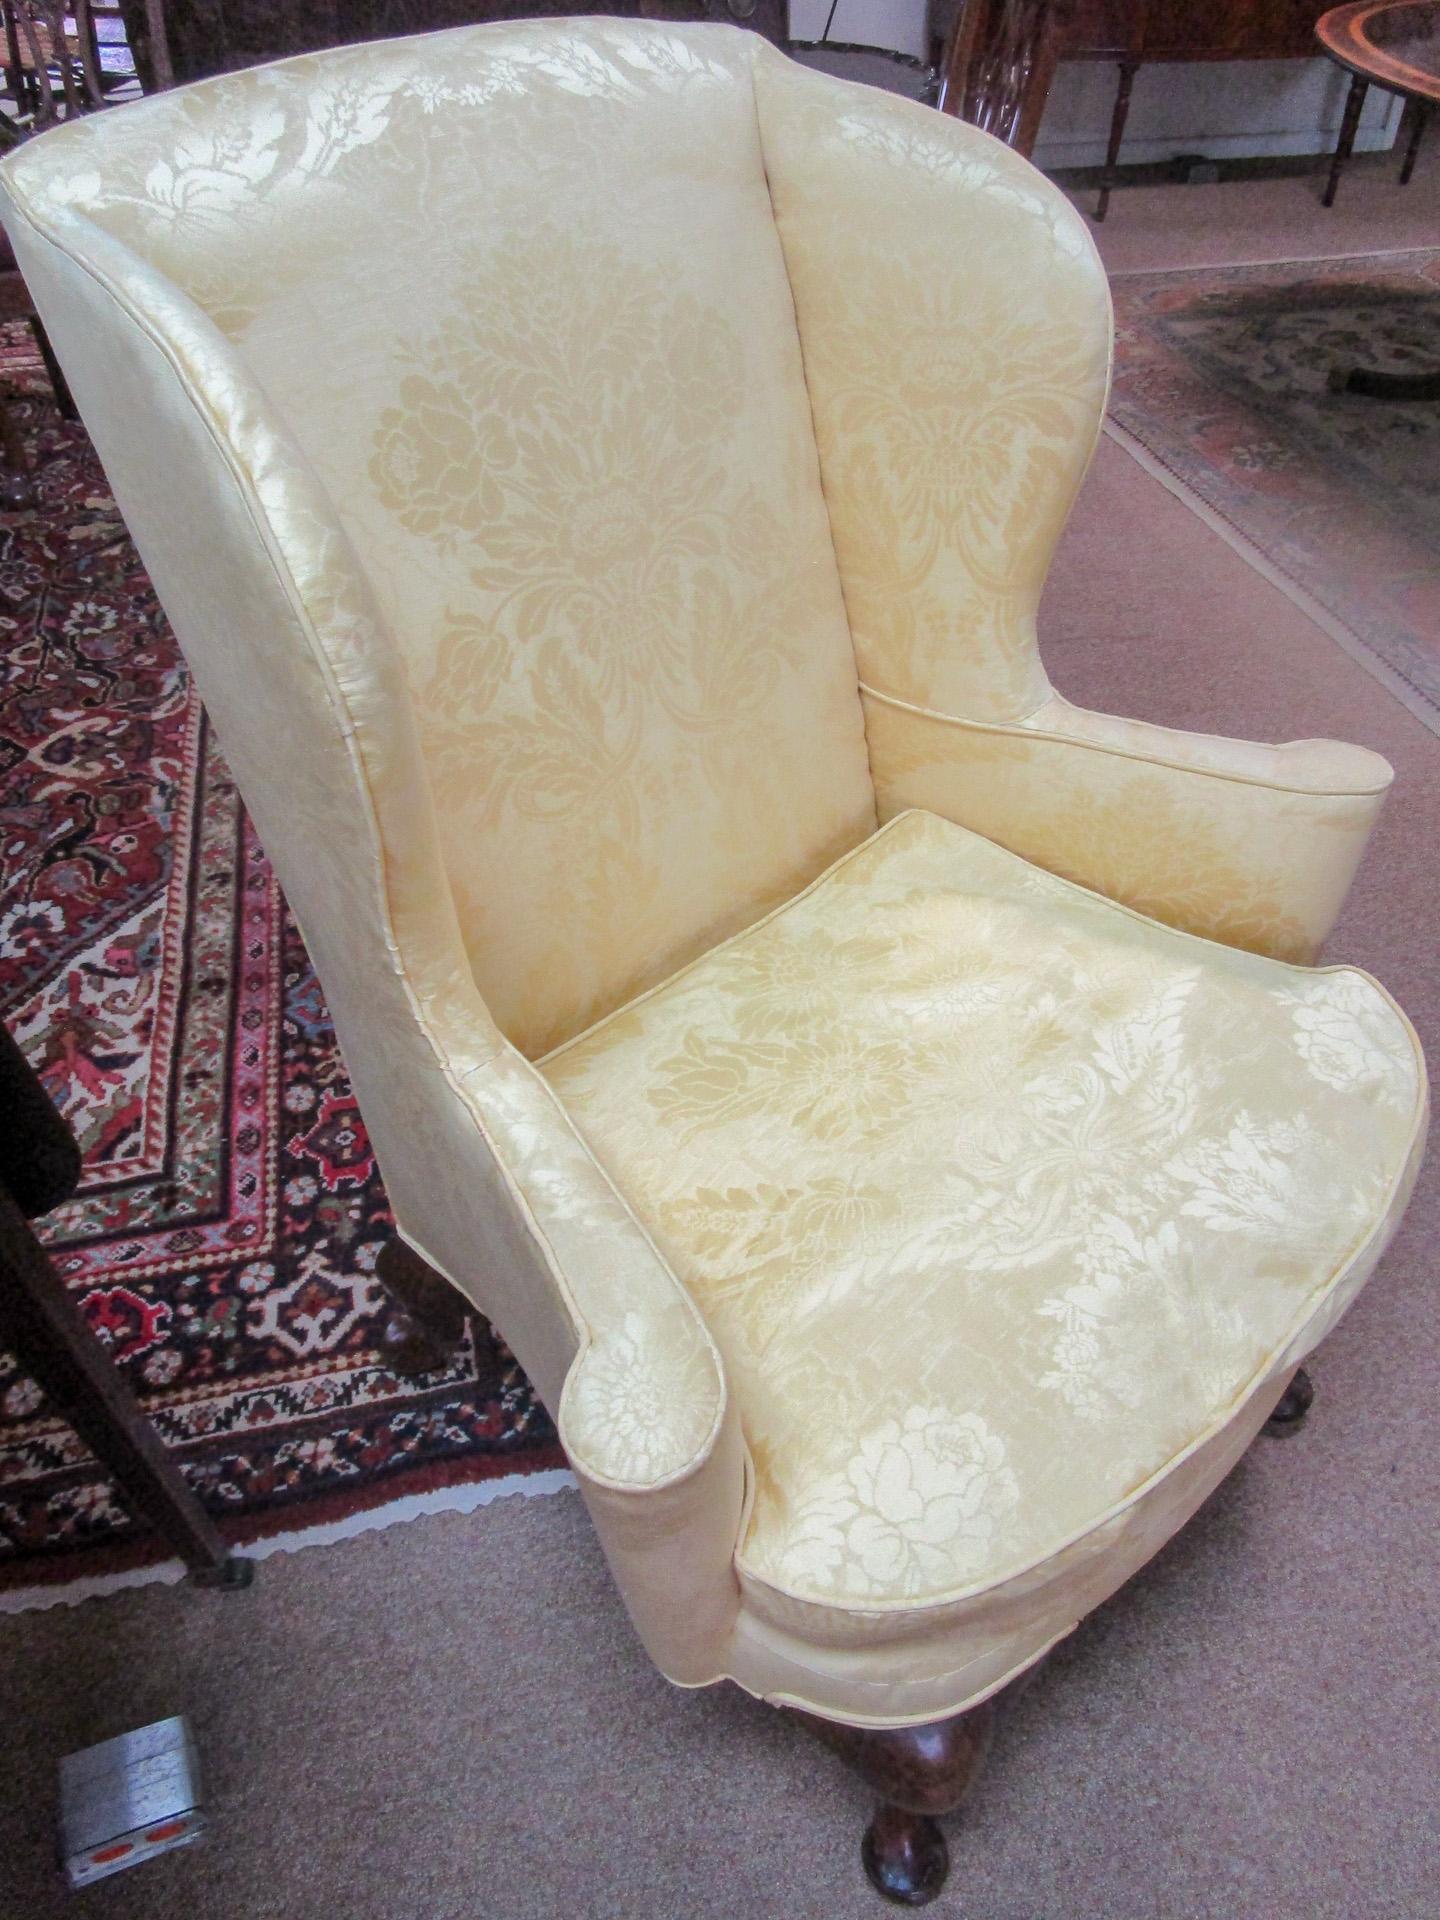 This graceful English Queen Anne wingback chair features gorgeous pale lemon damask upholstery with a loose, down cushion stuffing. It is unique to find a Queen Anne walnut cabriole leg ending in pad feet in both the front and in the back of the